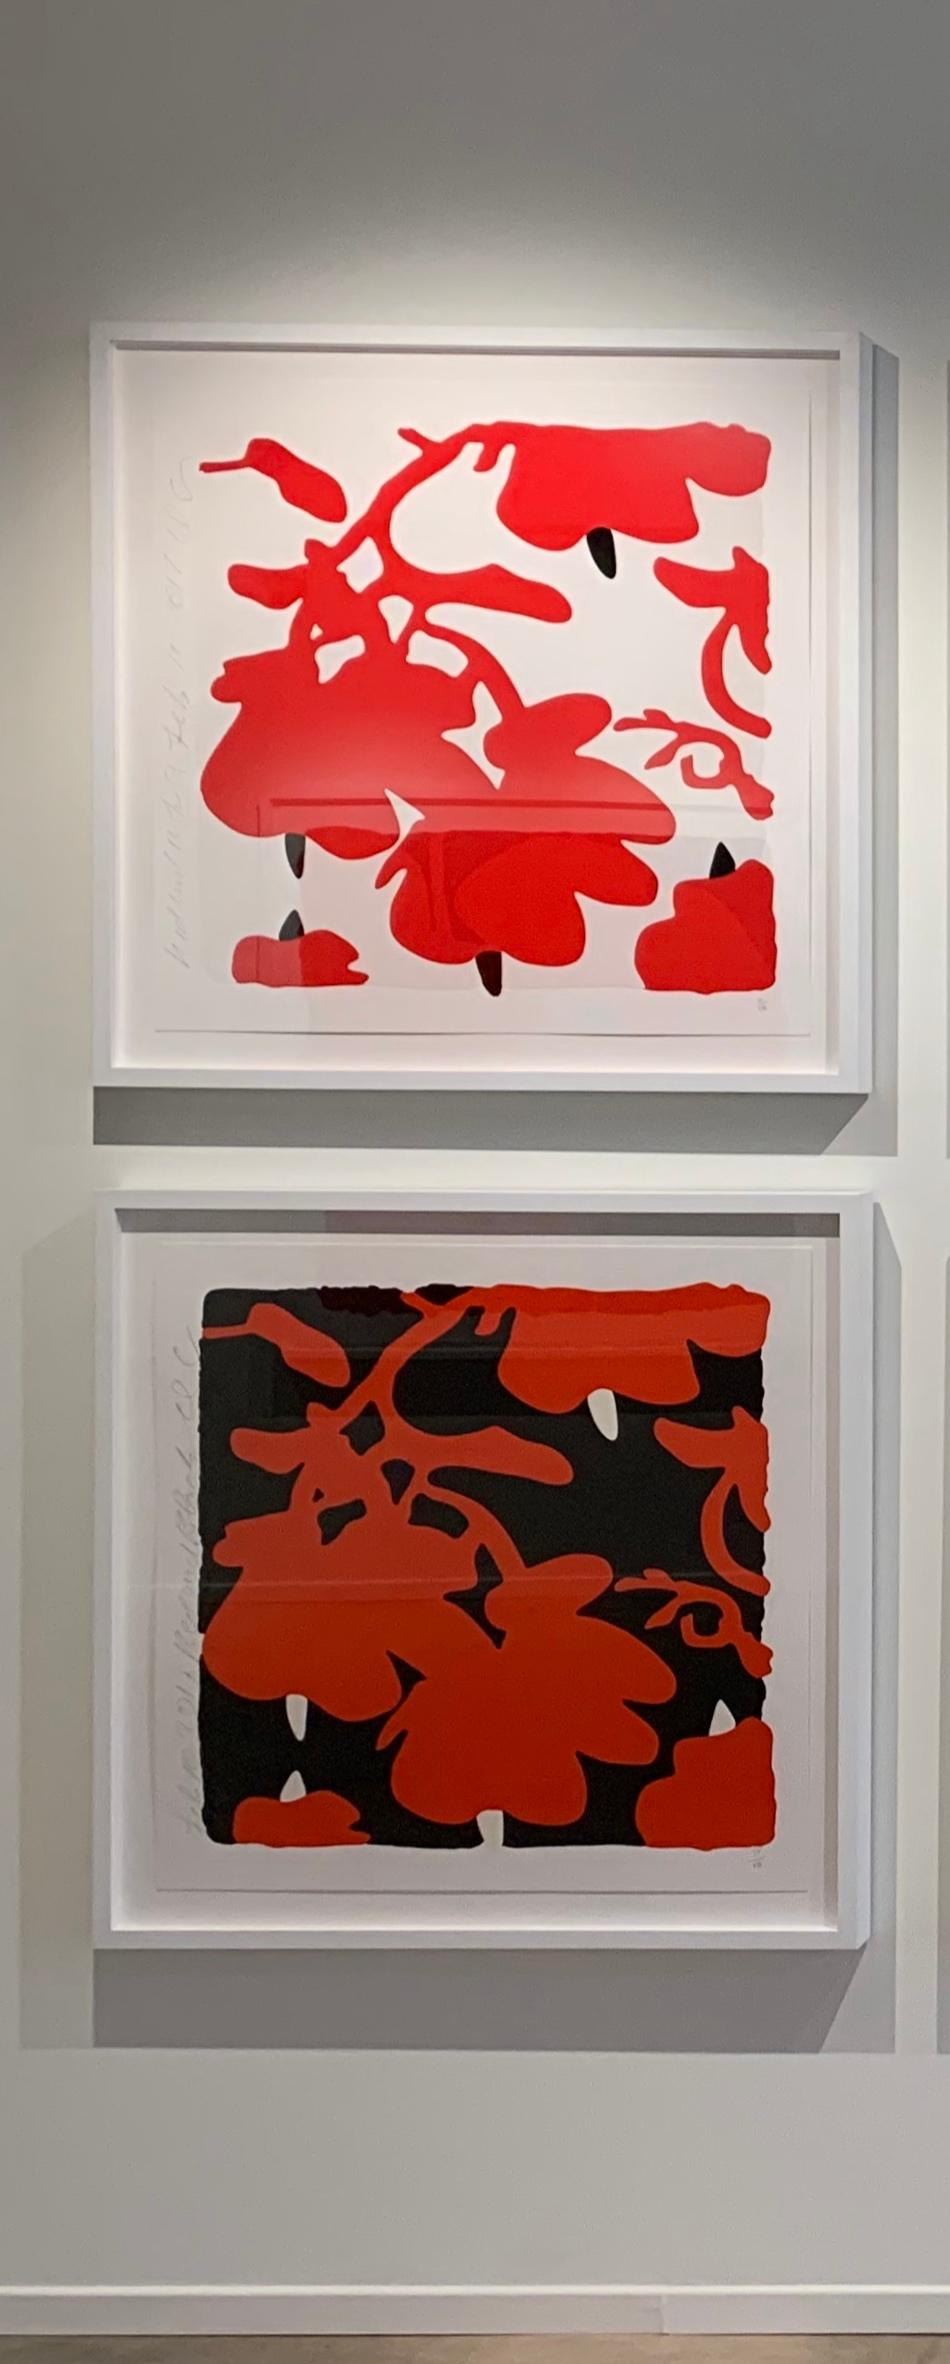 Donald Sultan (Born 1951)
Lantern Flowers (Red and Black), 2017
Color silkscreen with over-printed flocking on Rising, 2-ply museum board
32 x 32 in.
Edition 34 of 50
Signed by artist
Framed in white gallery frame and glass
